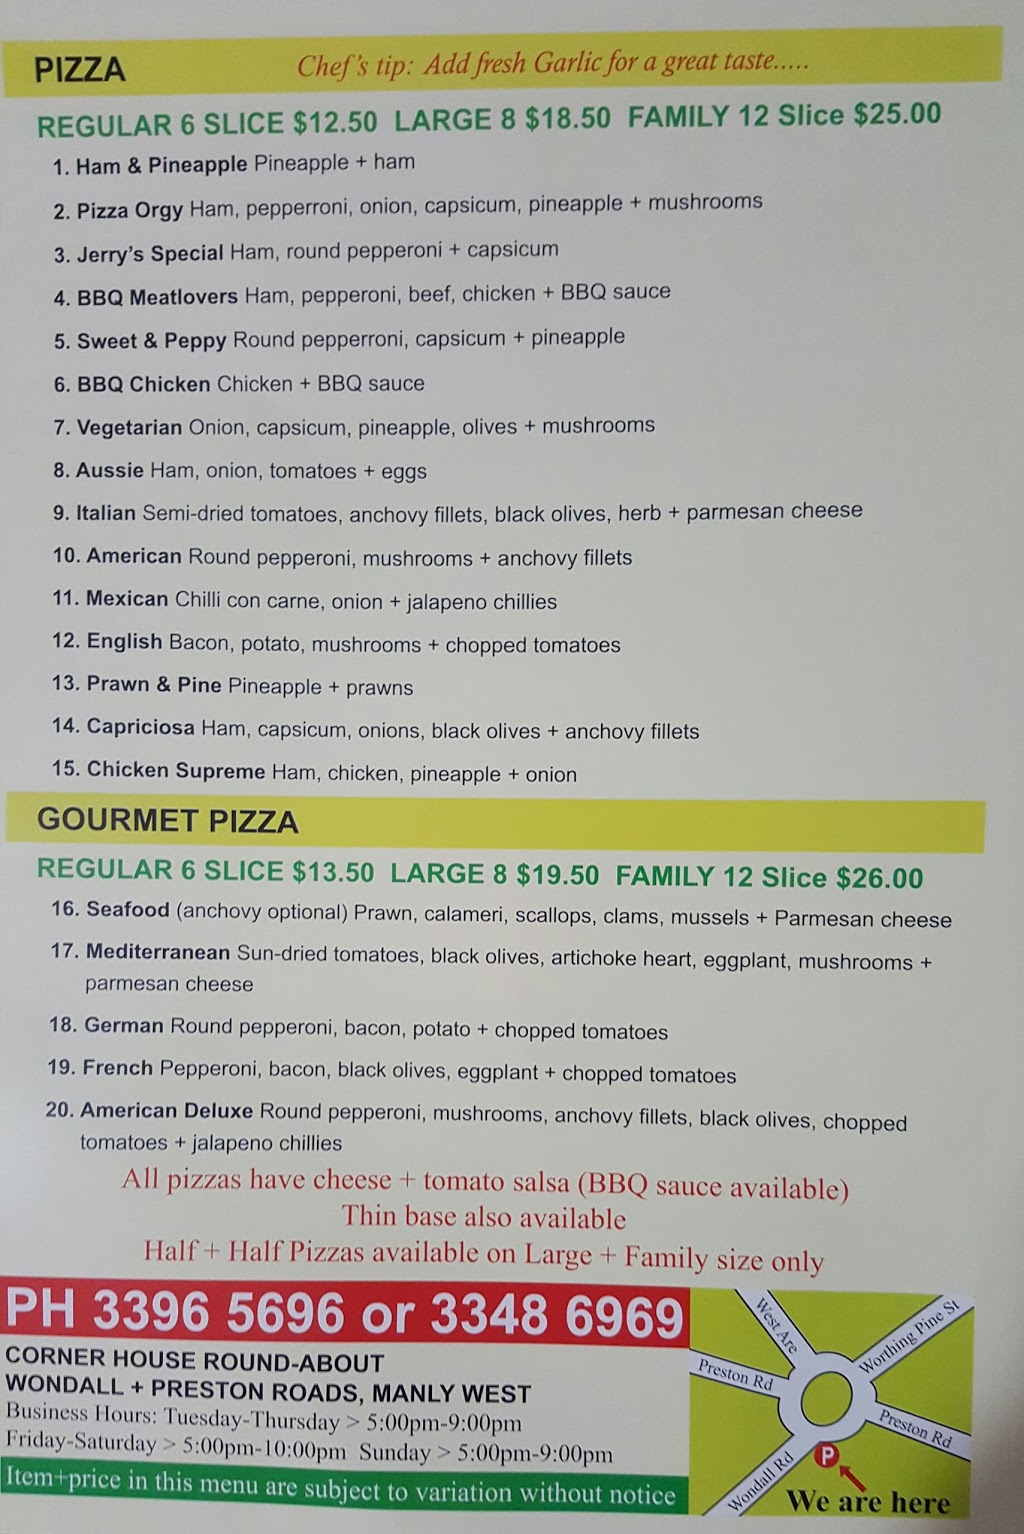 Pizzaland Manly West | 6/212 Preston Rd, Manly West QLD 4179, Australia | Phone: (07) 3396 5696